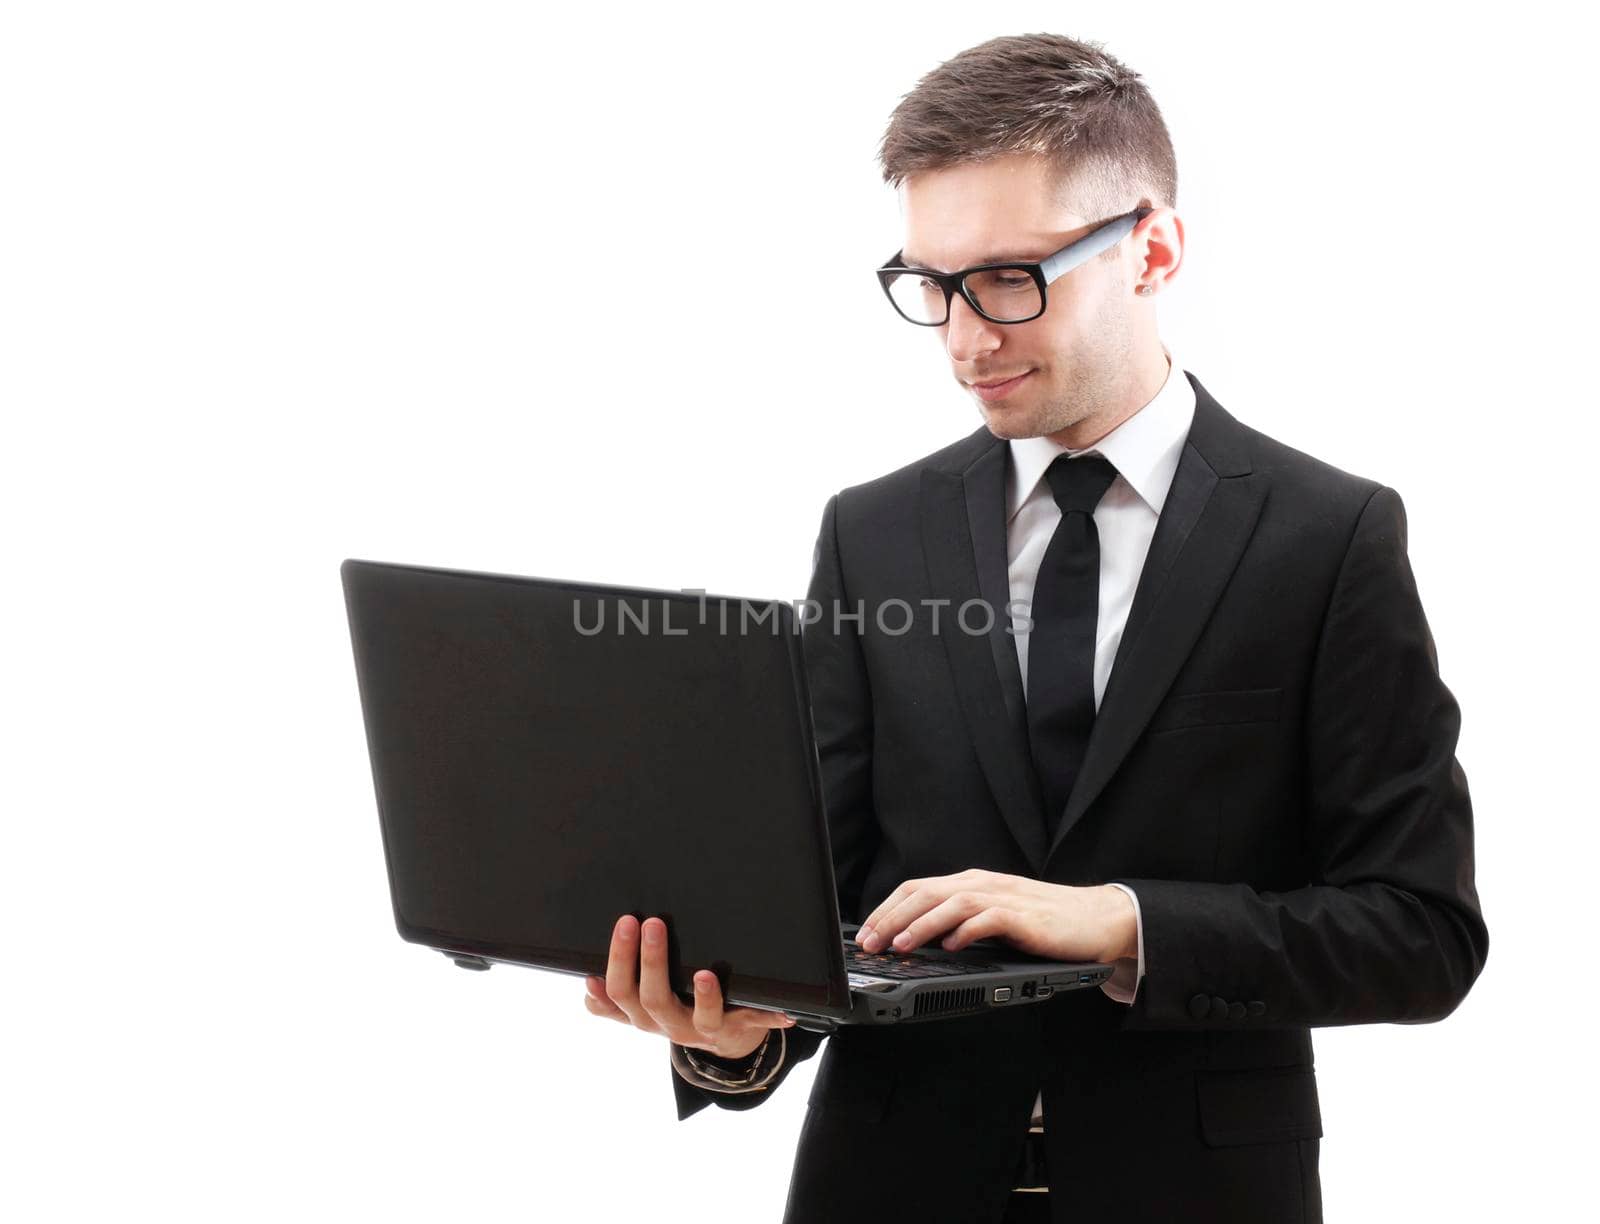 Business man holding a laptop and smiling. by Jyliana